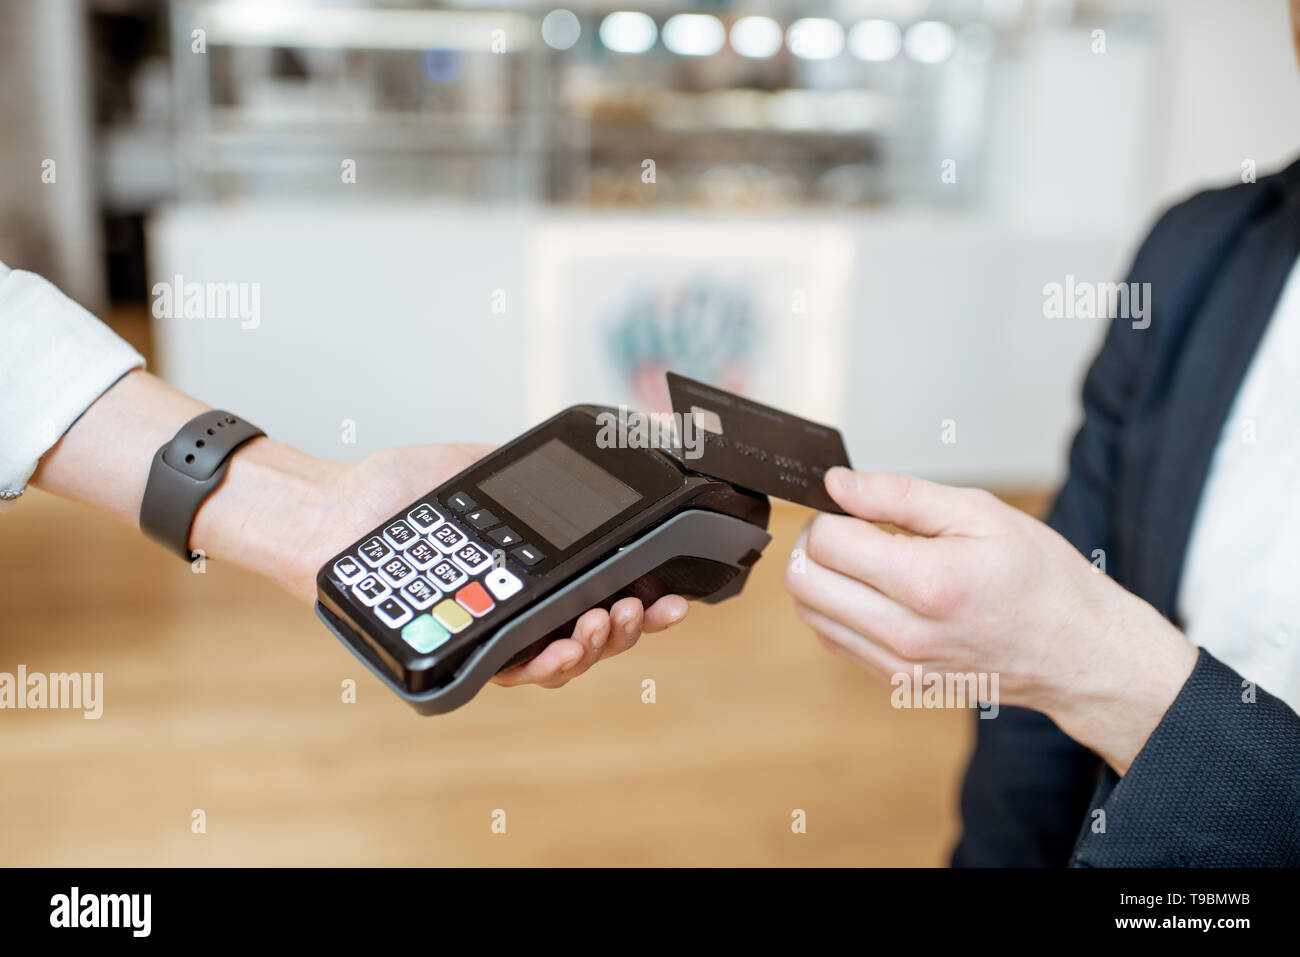 Businessman paying contactless with bank card at the cafe, close-up view Stock Photo